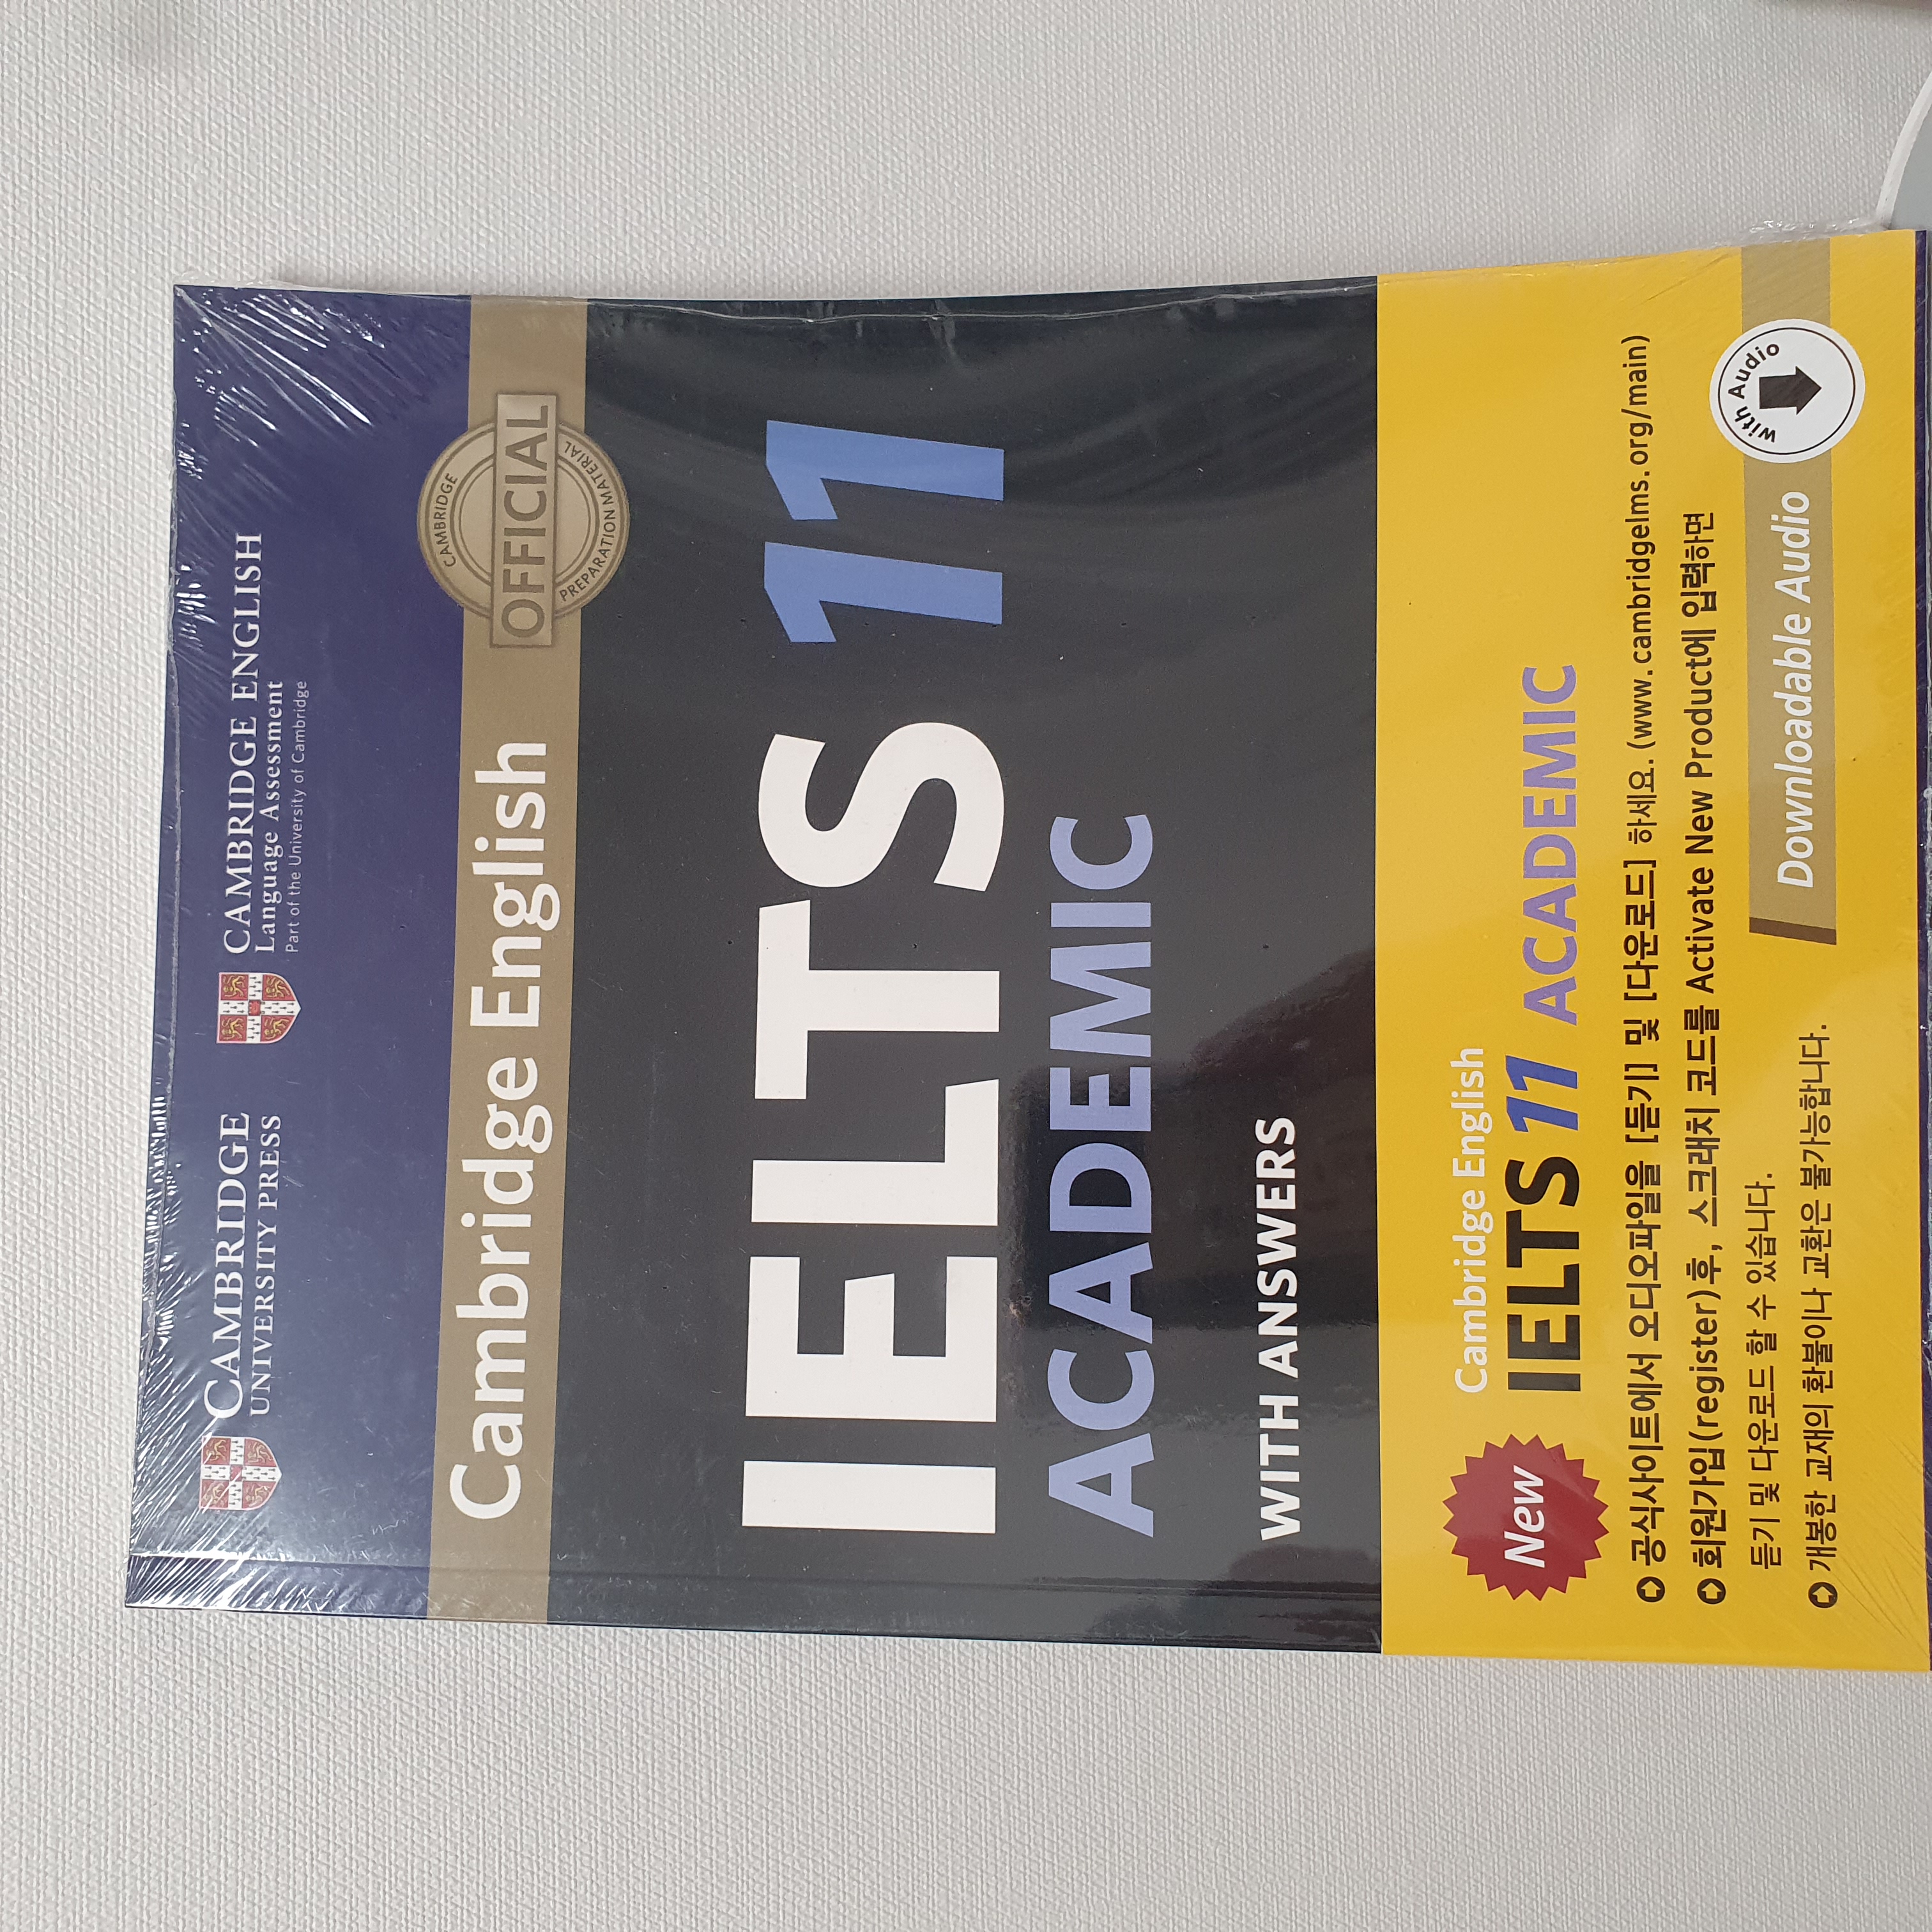 Cambridge IELTS 11 : Academic Student's Book with Answers